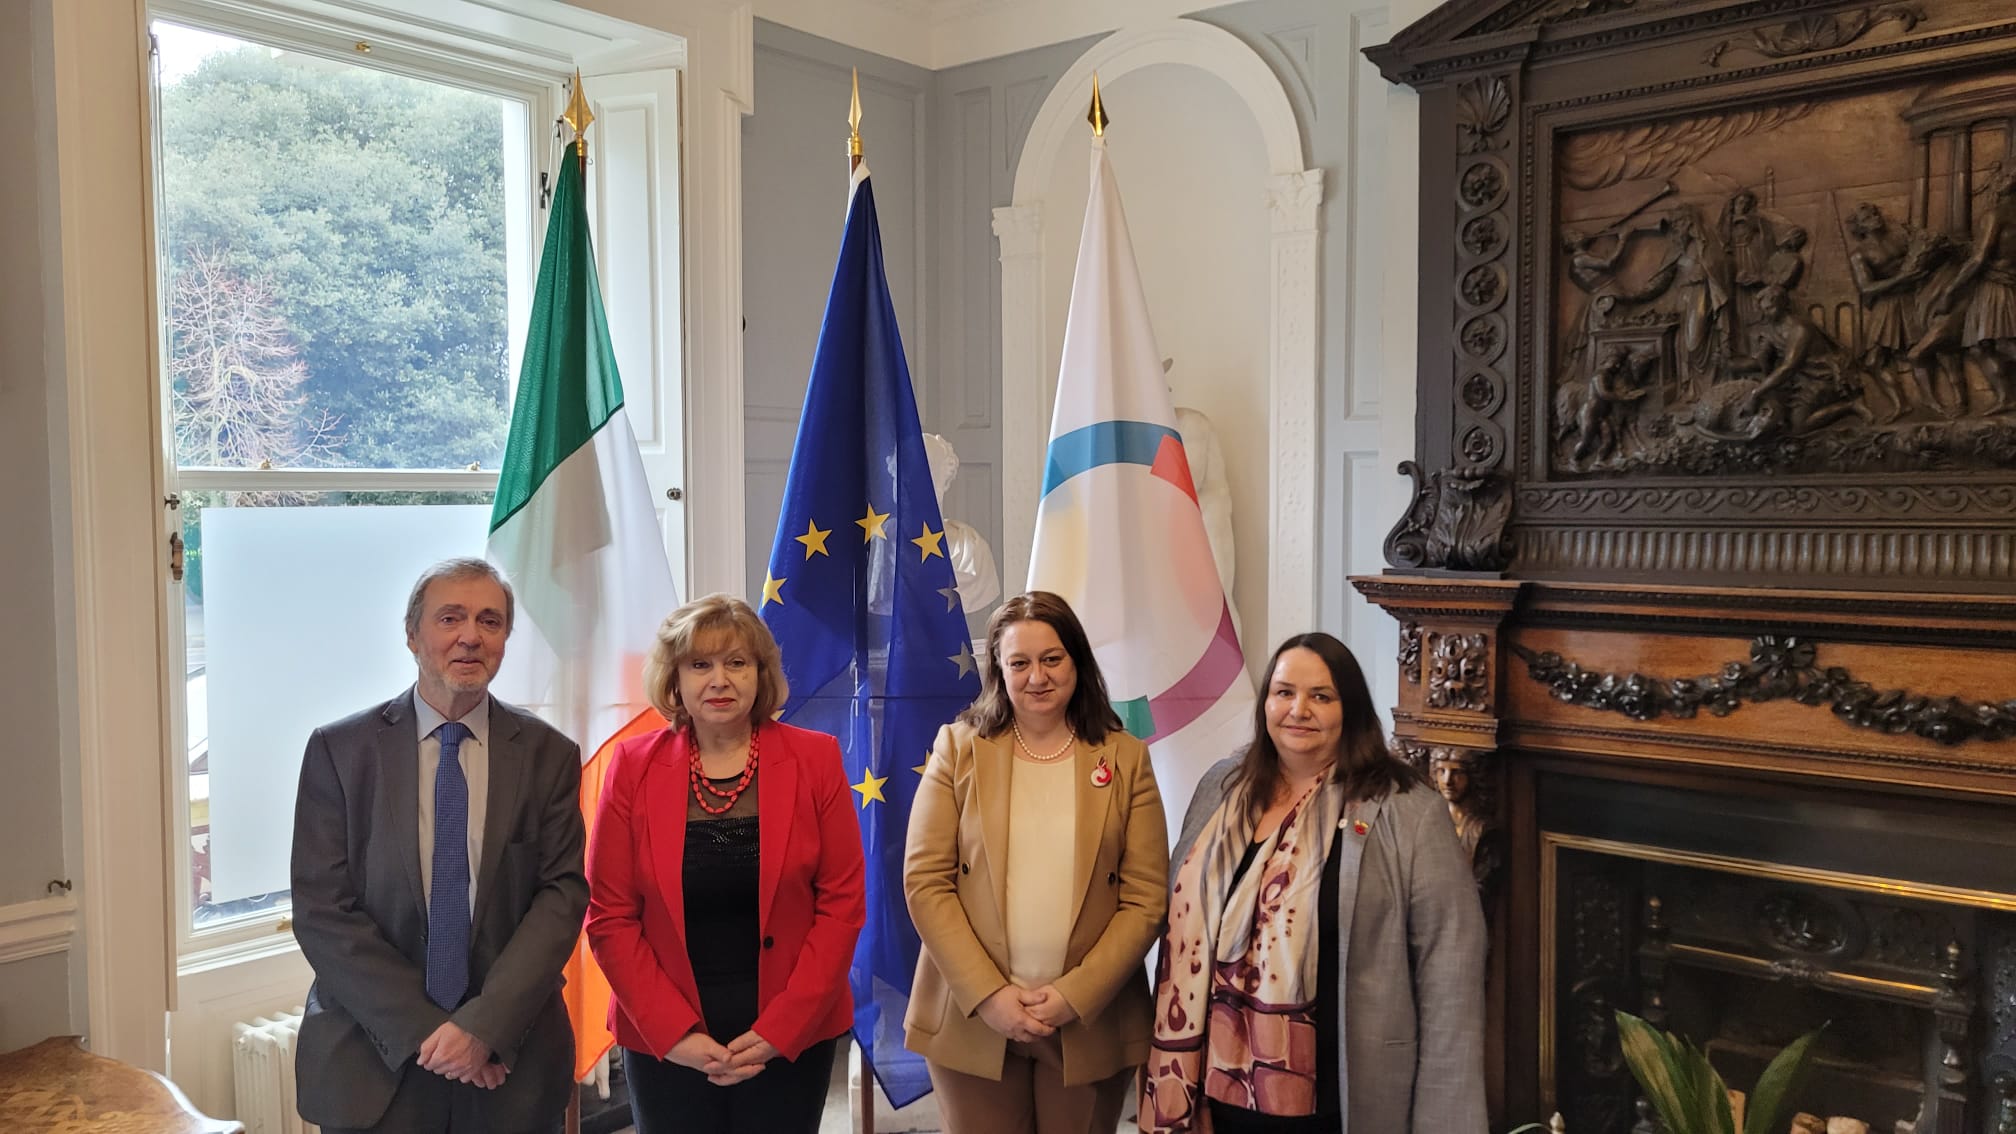 Launch of the 2023 Francophonie Festival at Iveagh House 